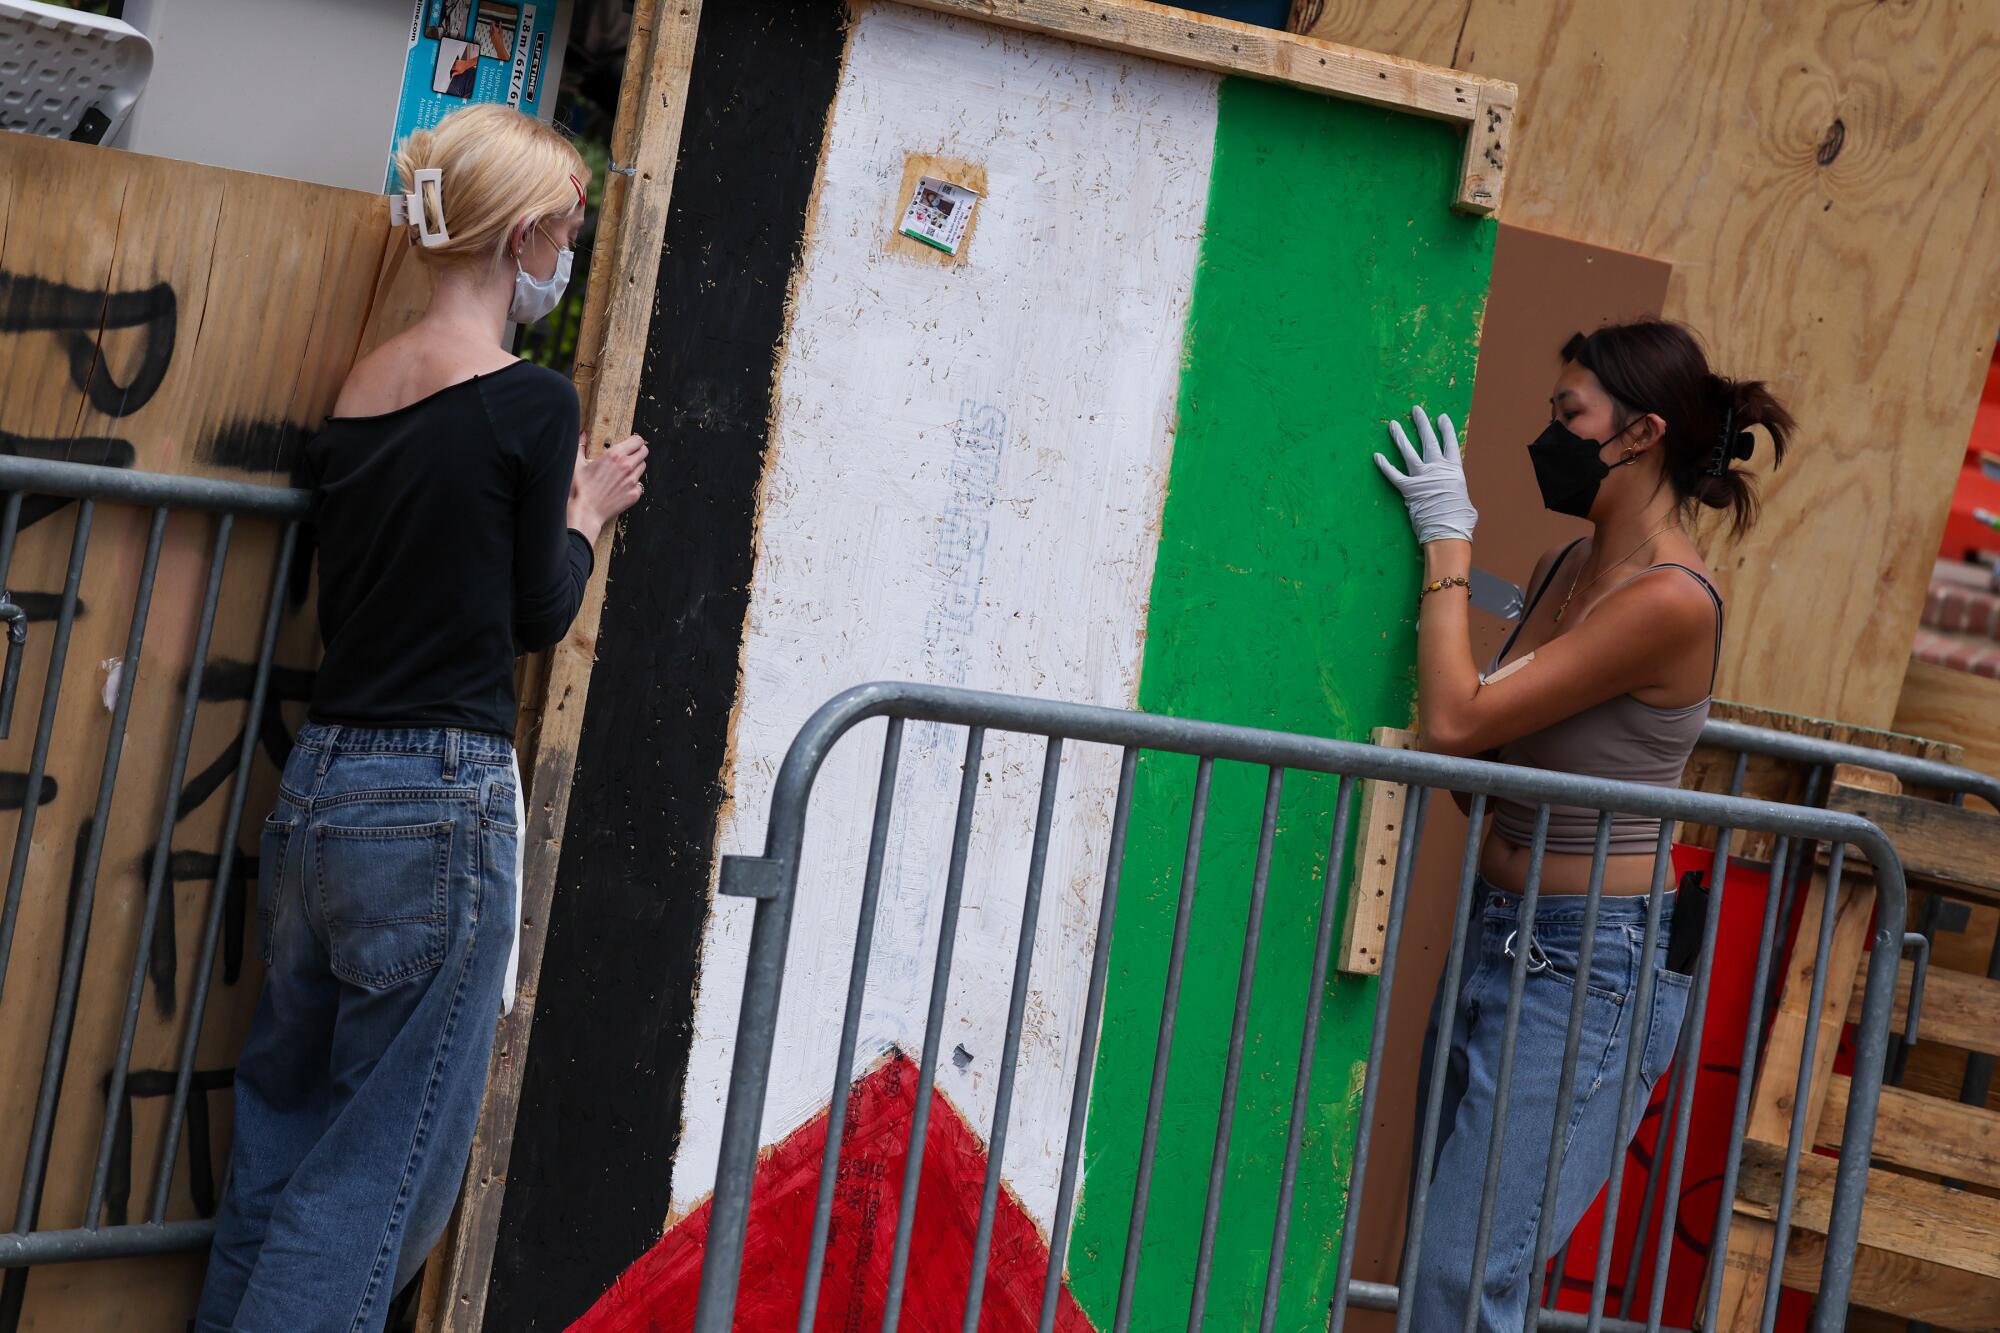 Two protesters wearing masks move a wood panel painted with the colors of the Palestinian flag